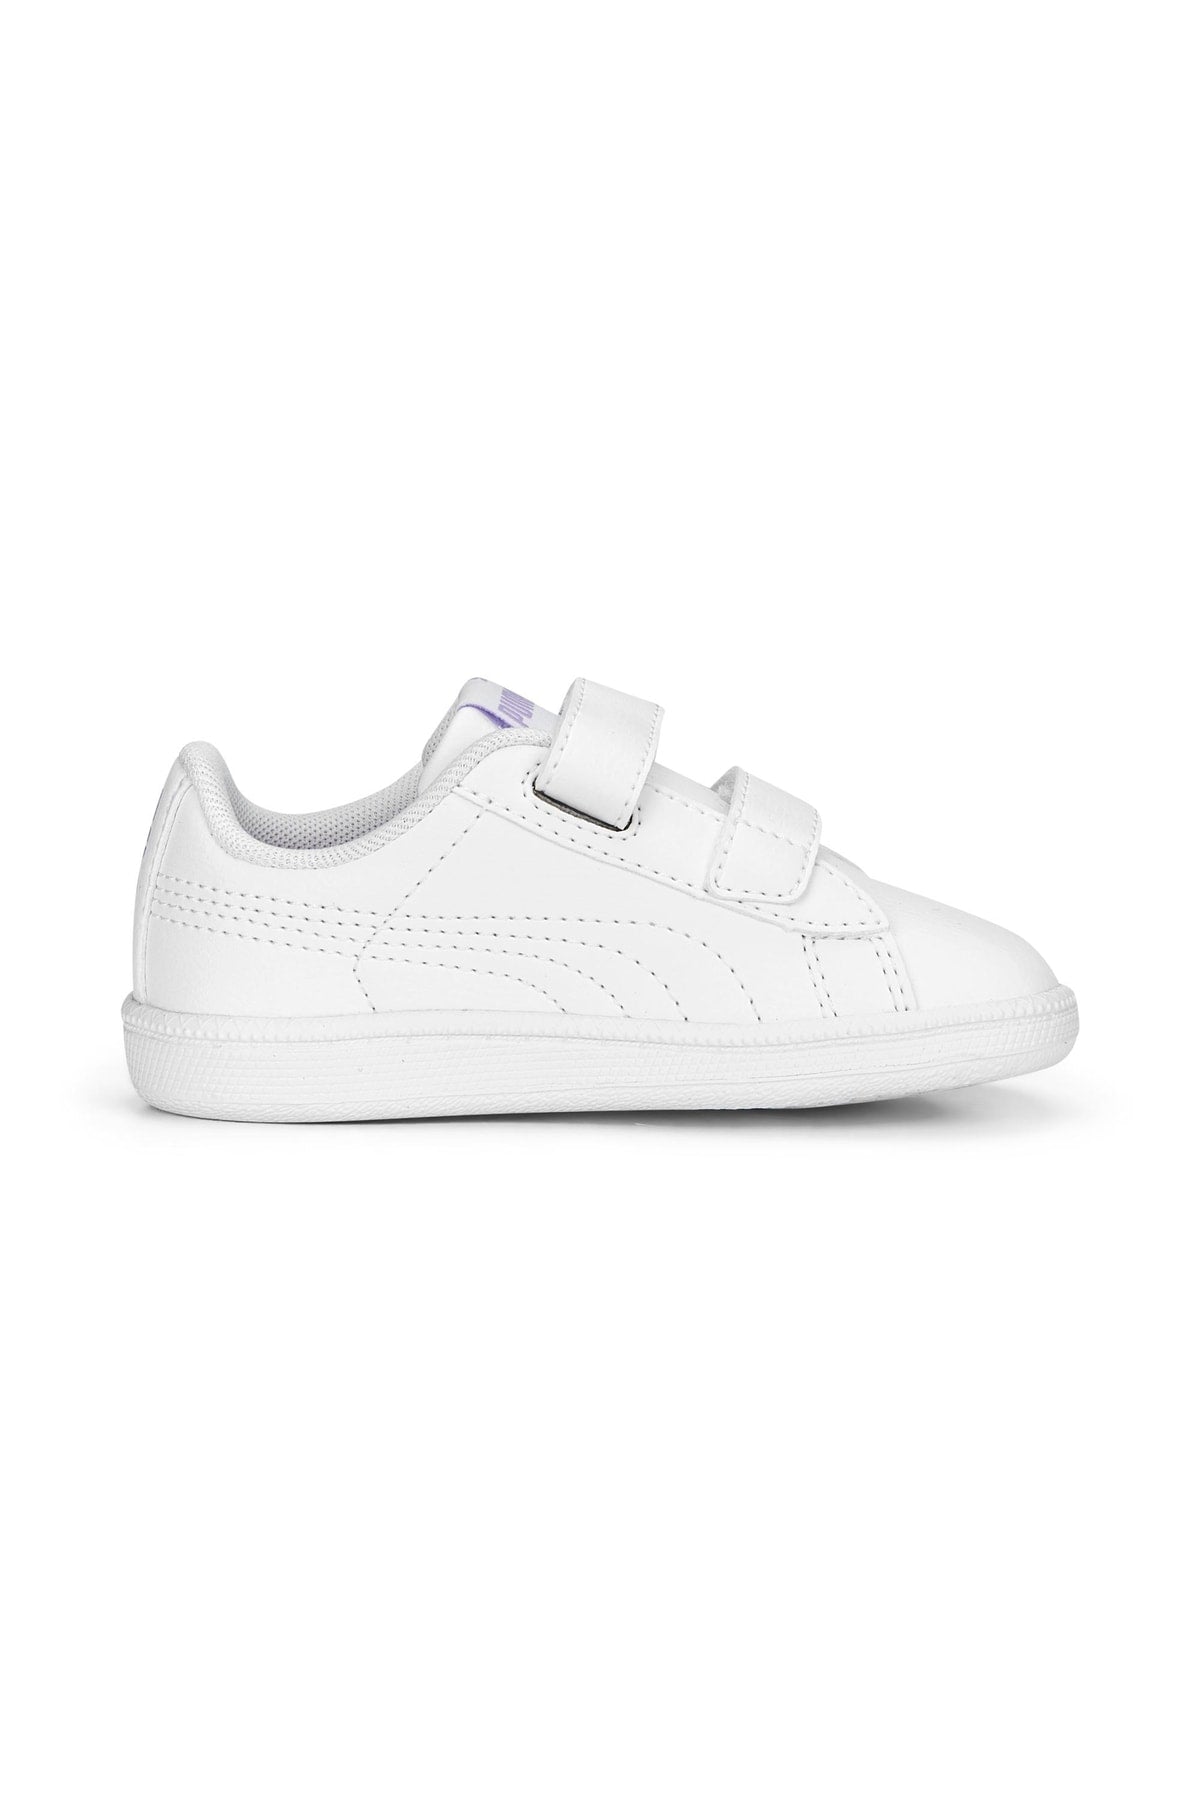 UP V Inf - White Baby Sneakers